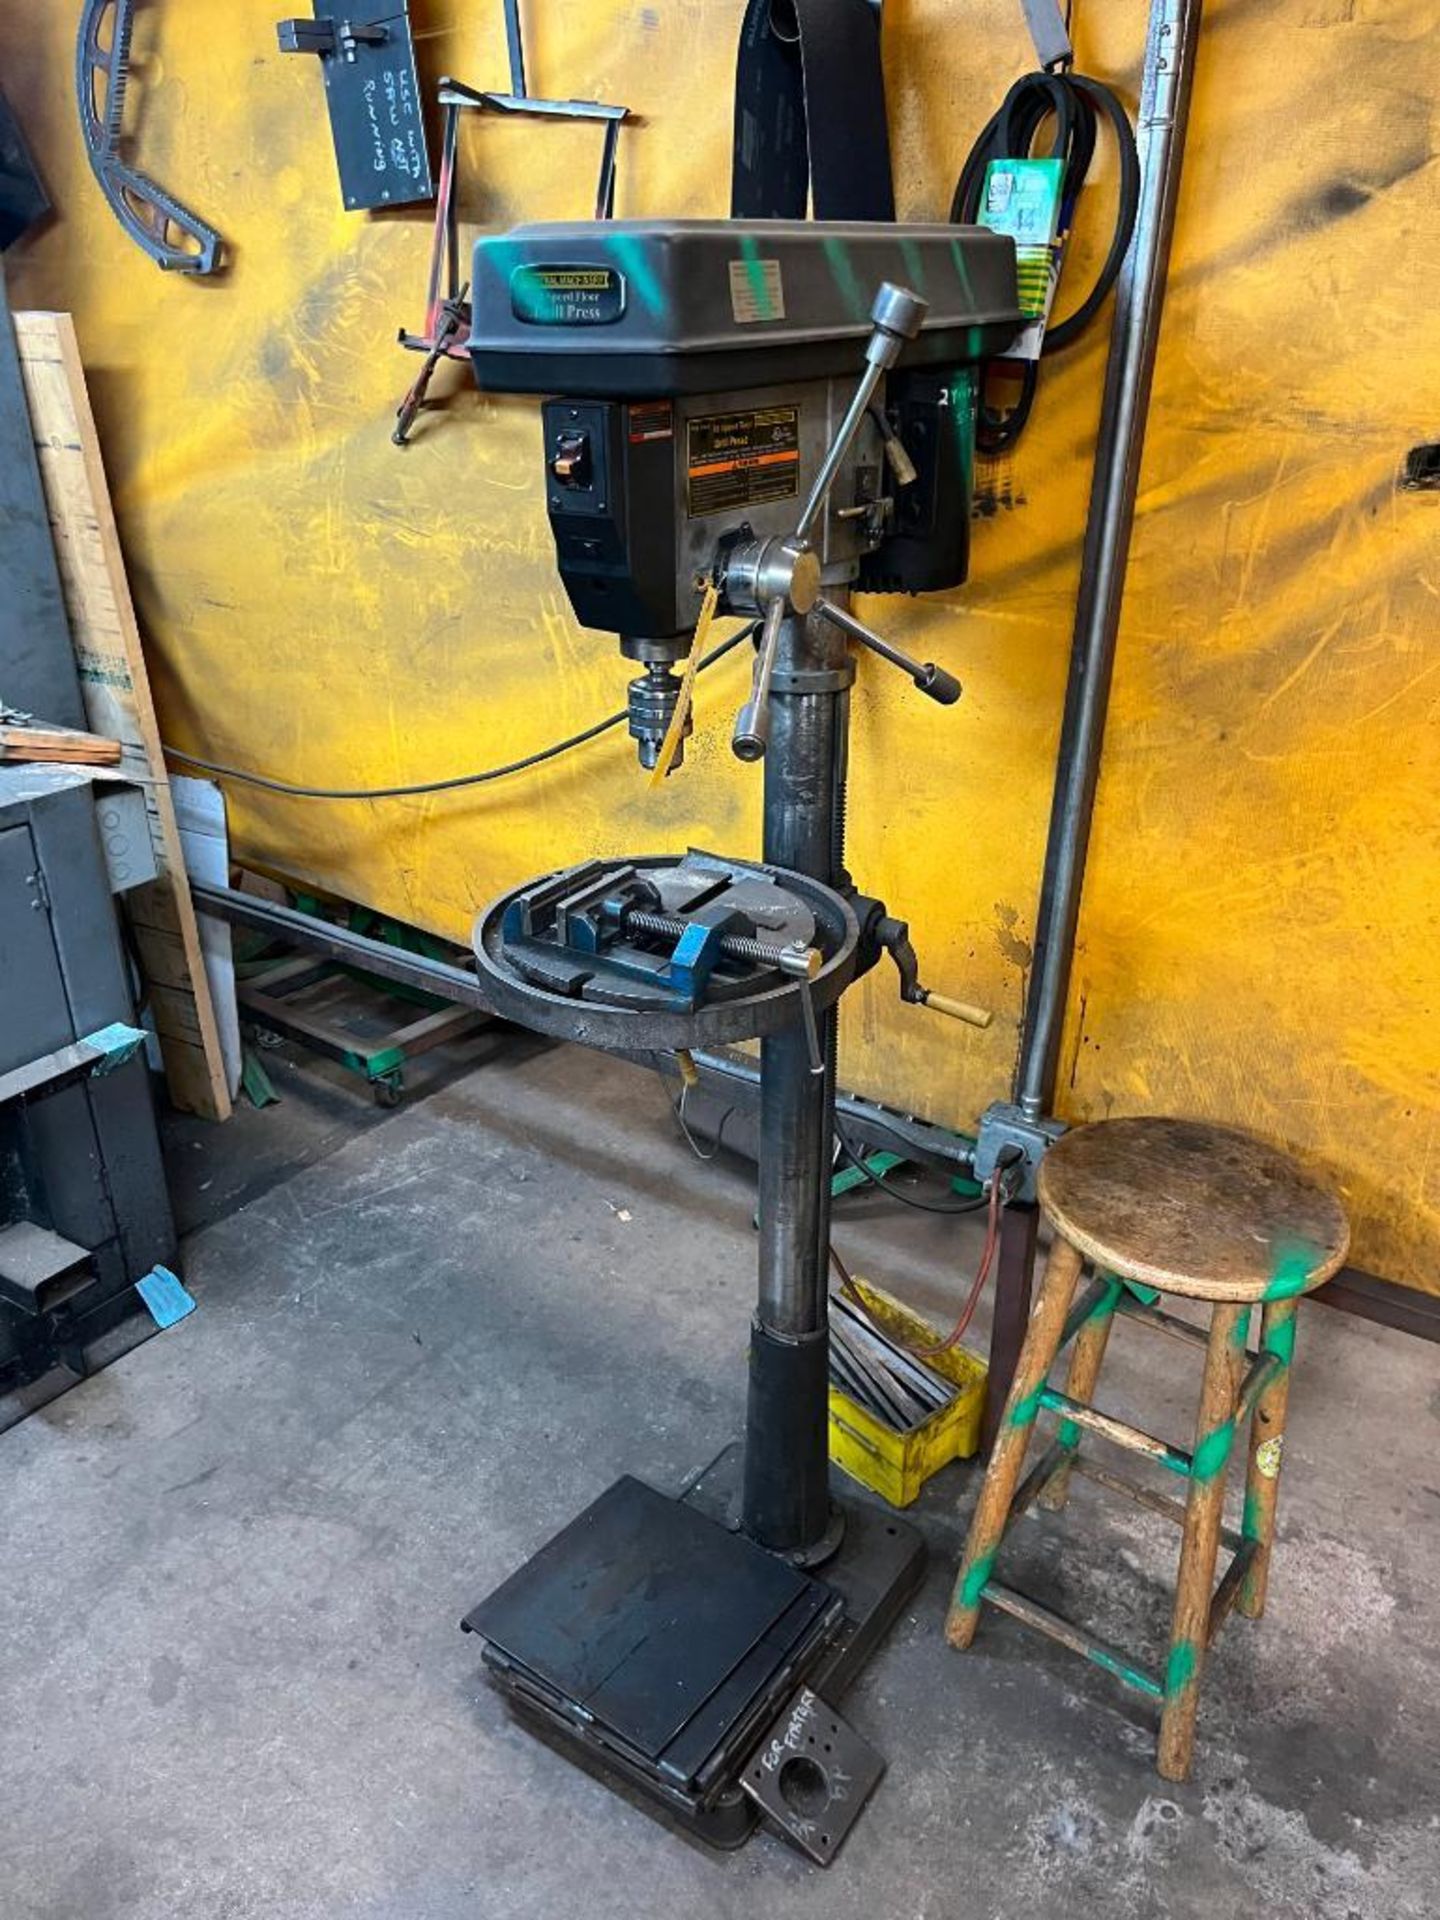 Central Machinery 16-Speed Floor Drill Press, S/N 43389, 120V